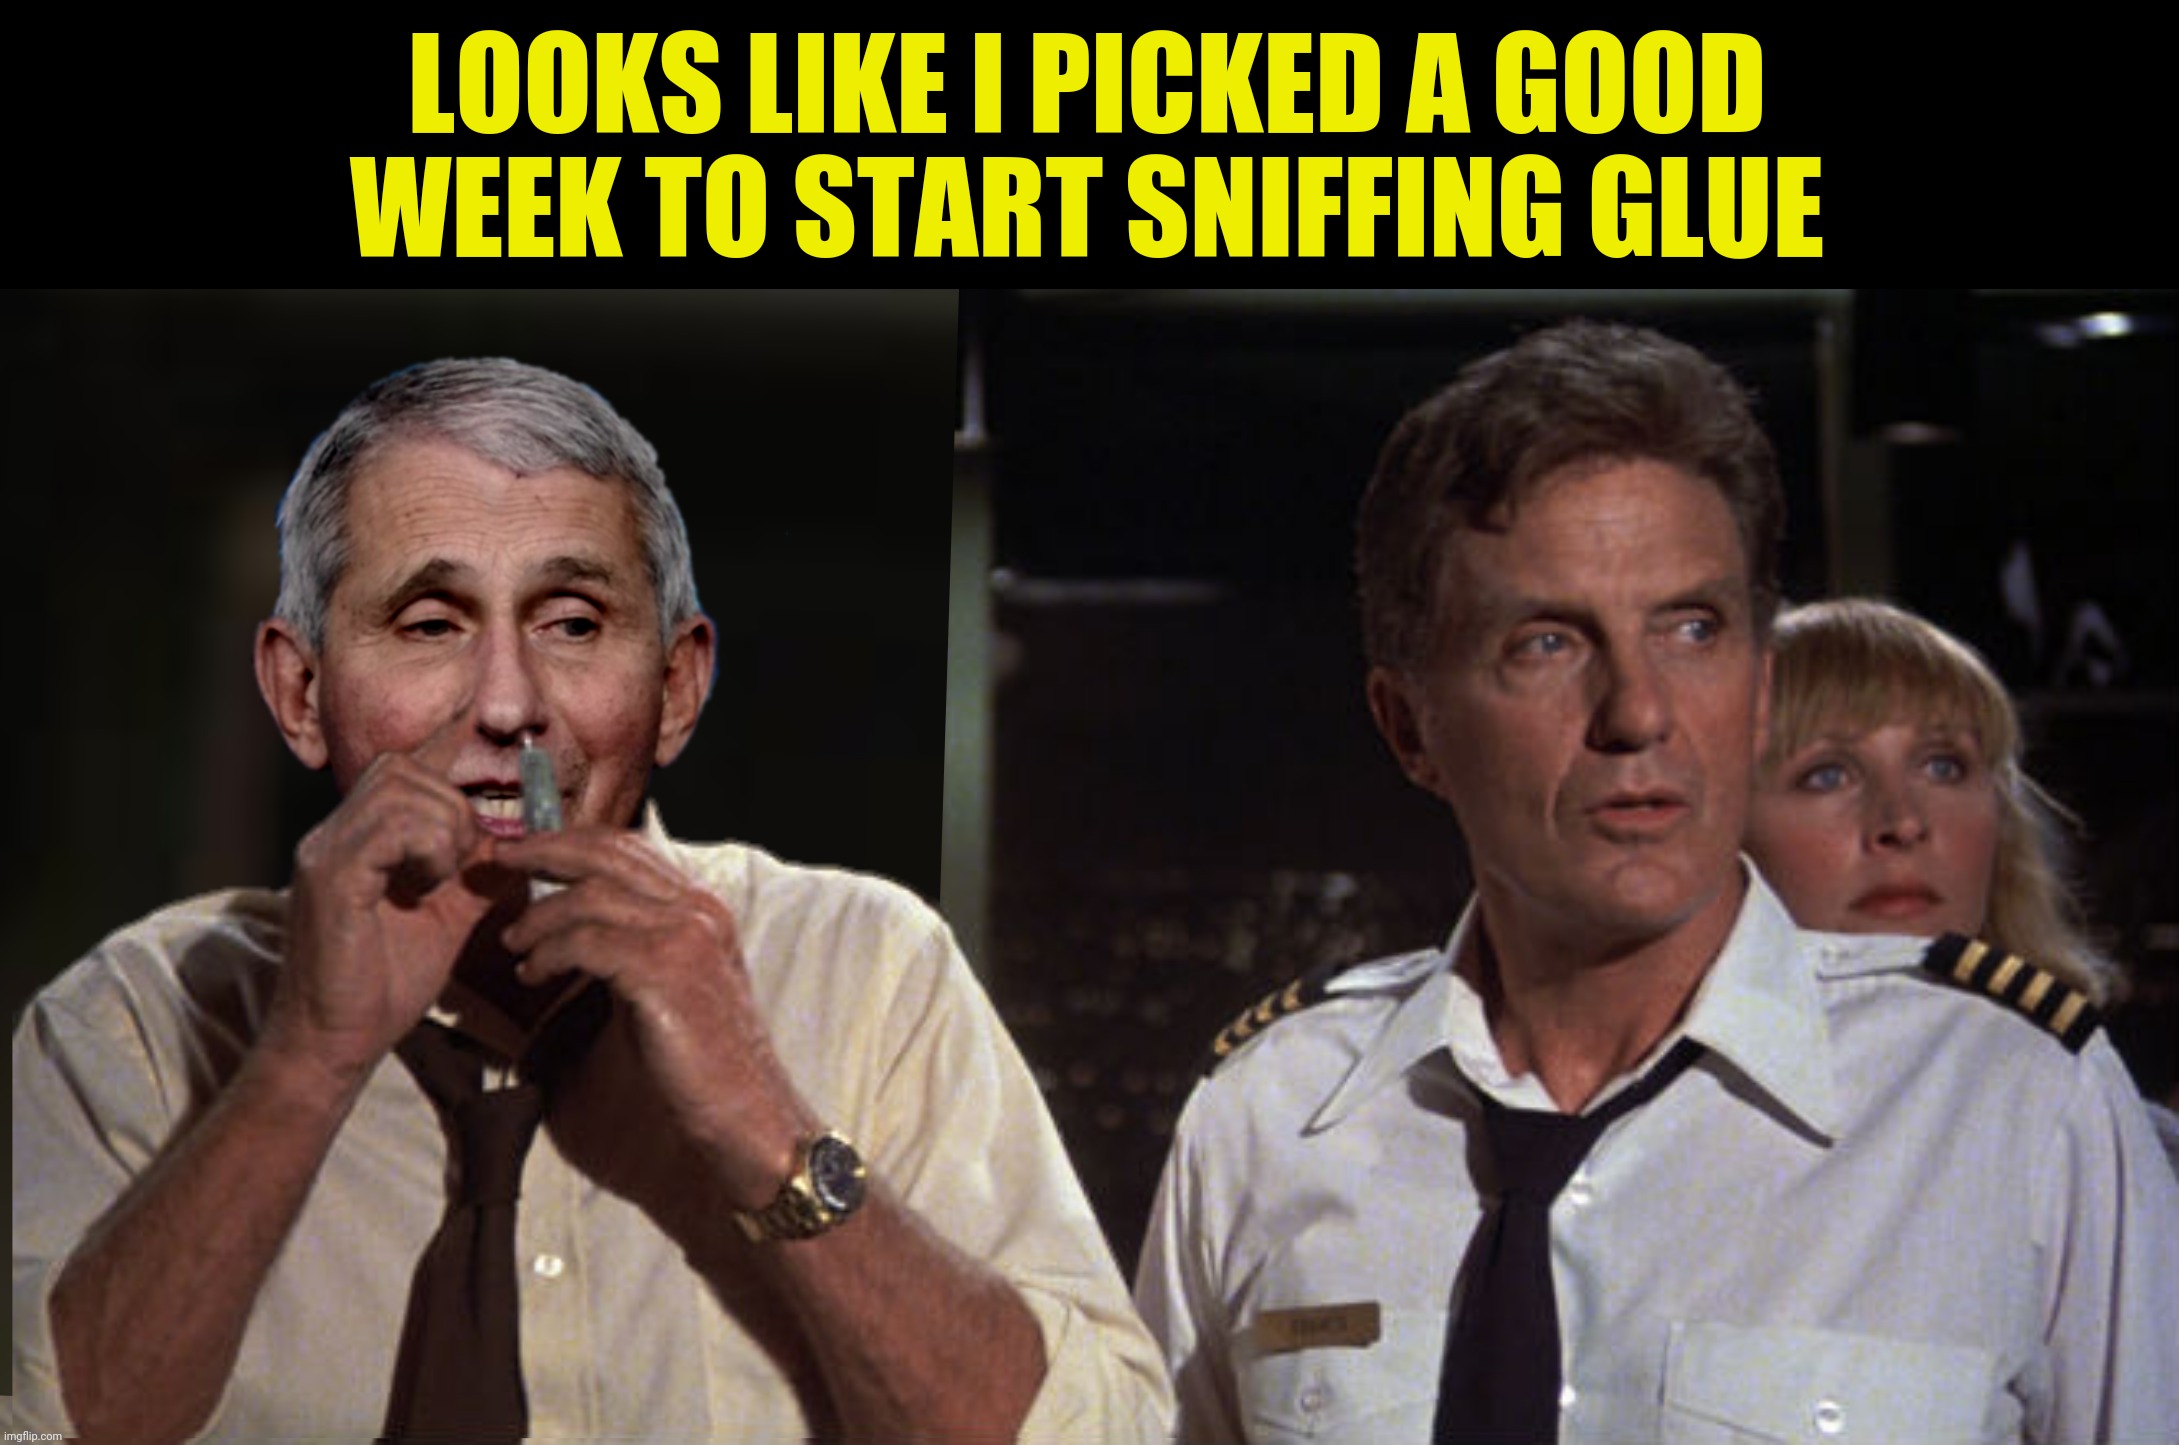 Bad Photoshop Sunday presents:  Science and data | LOOKS LIKE I PICKED A GOOD WEEK TO START SNIFFING GLUE | image tagged in bad photoshop sunday,anthony fauci,airplane,sniffing glue | made w/ Imgflip meme maker